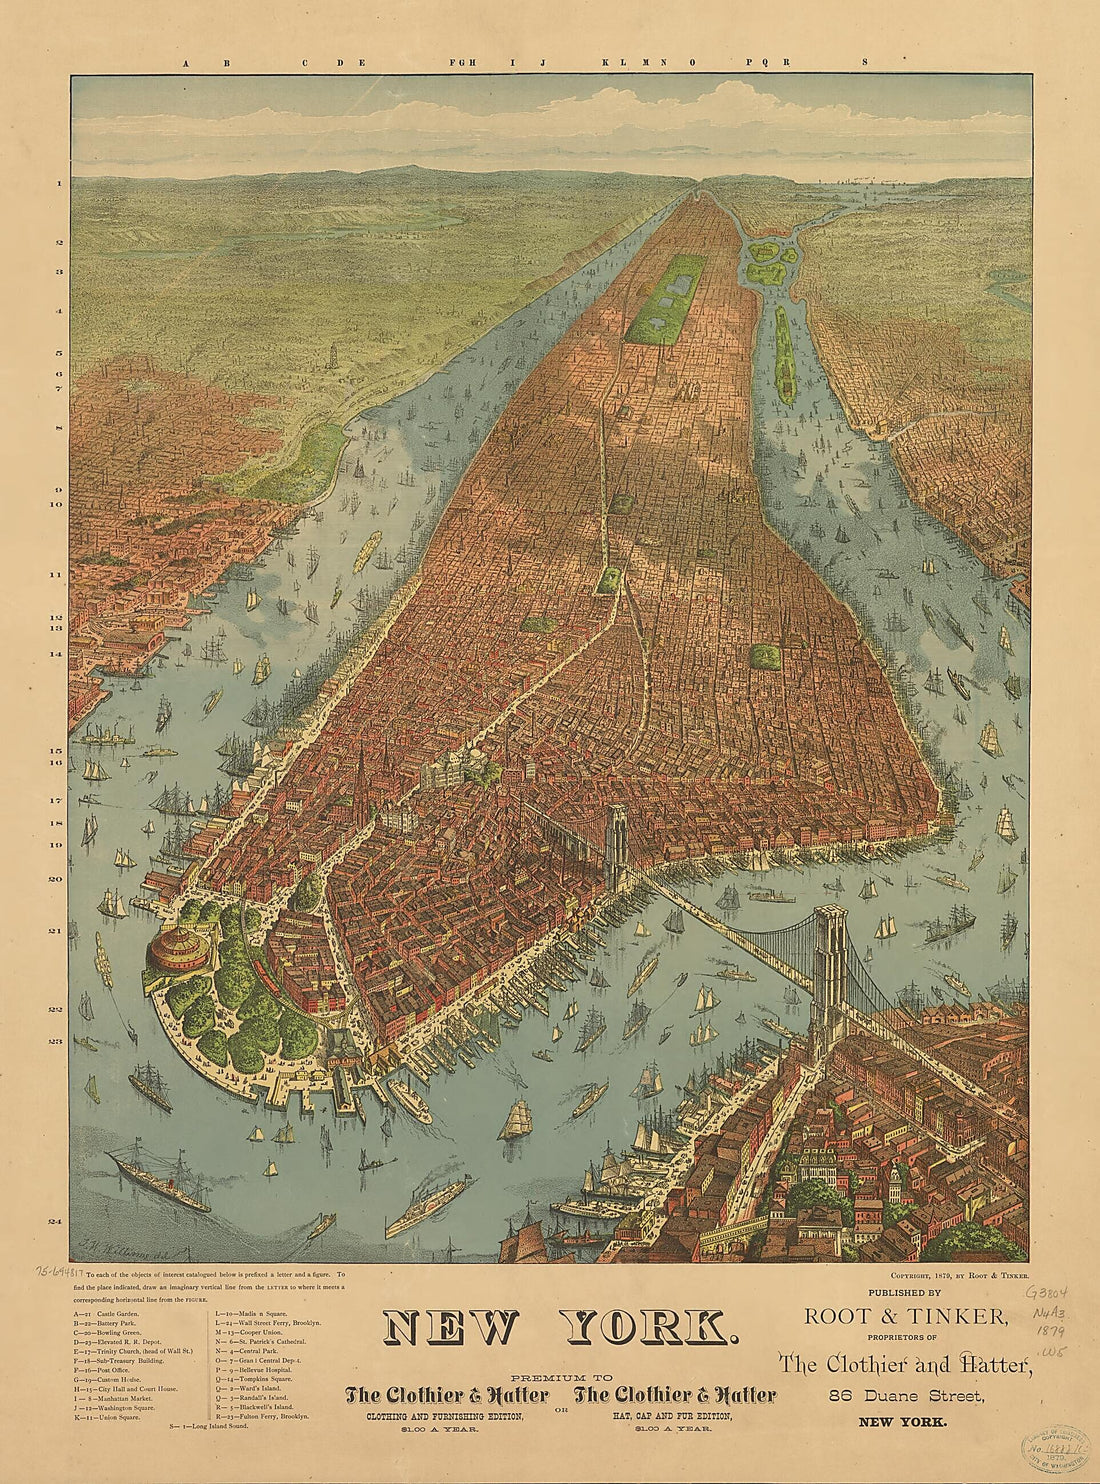 This old map of New York from 1879 was created by  Root &amp; Tinker, J. W. Williams in 1879